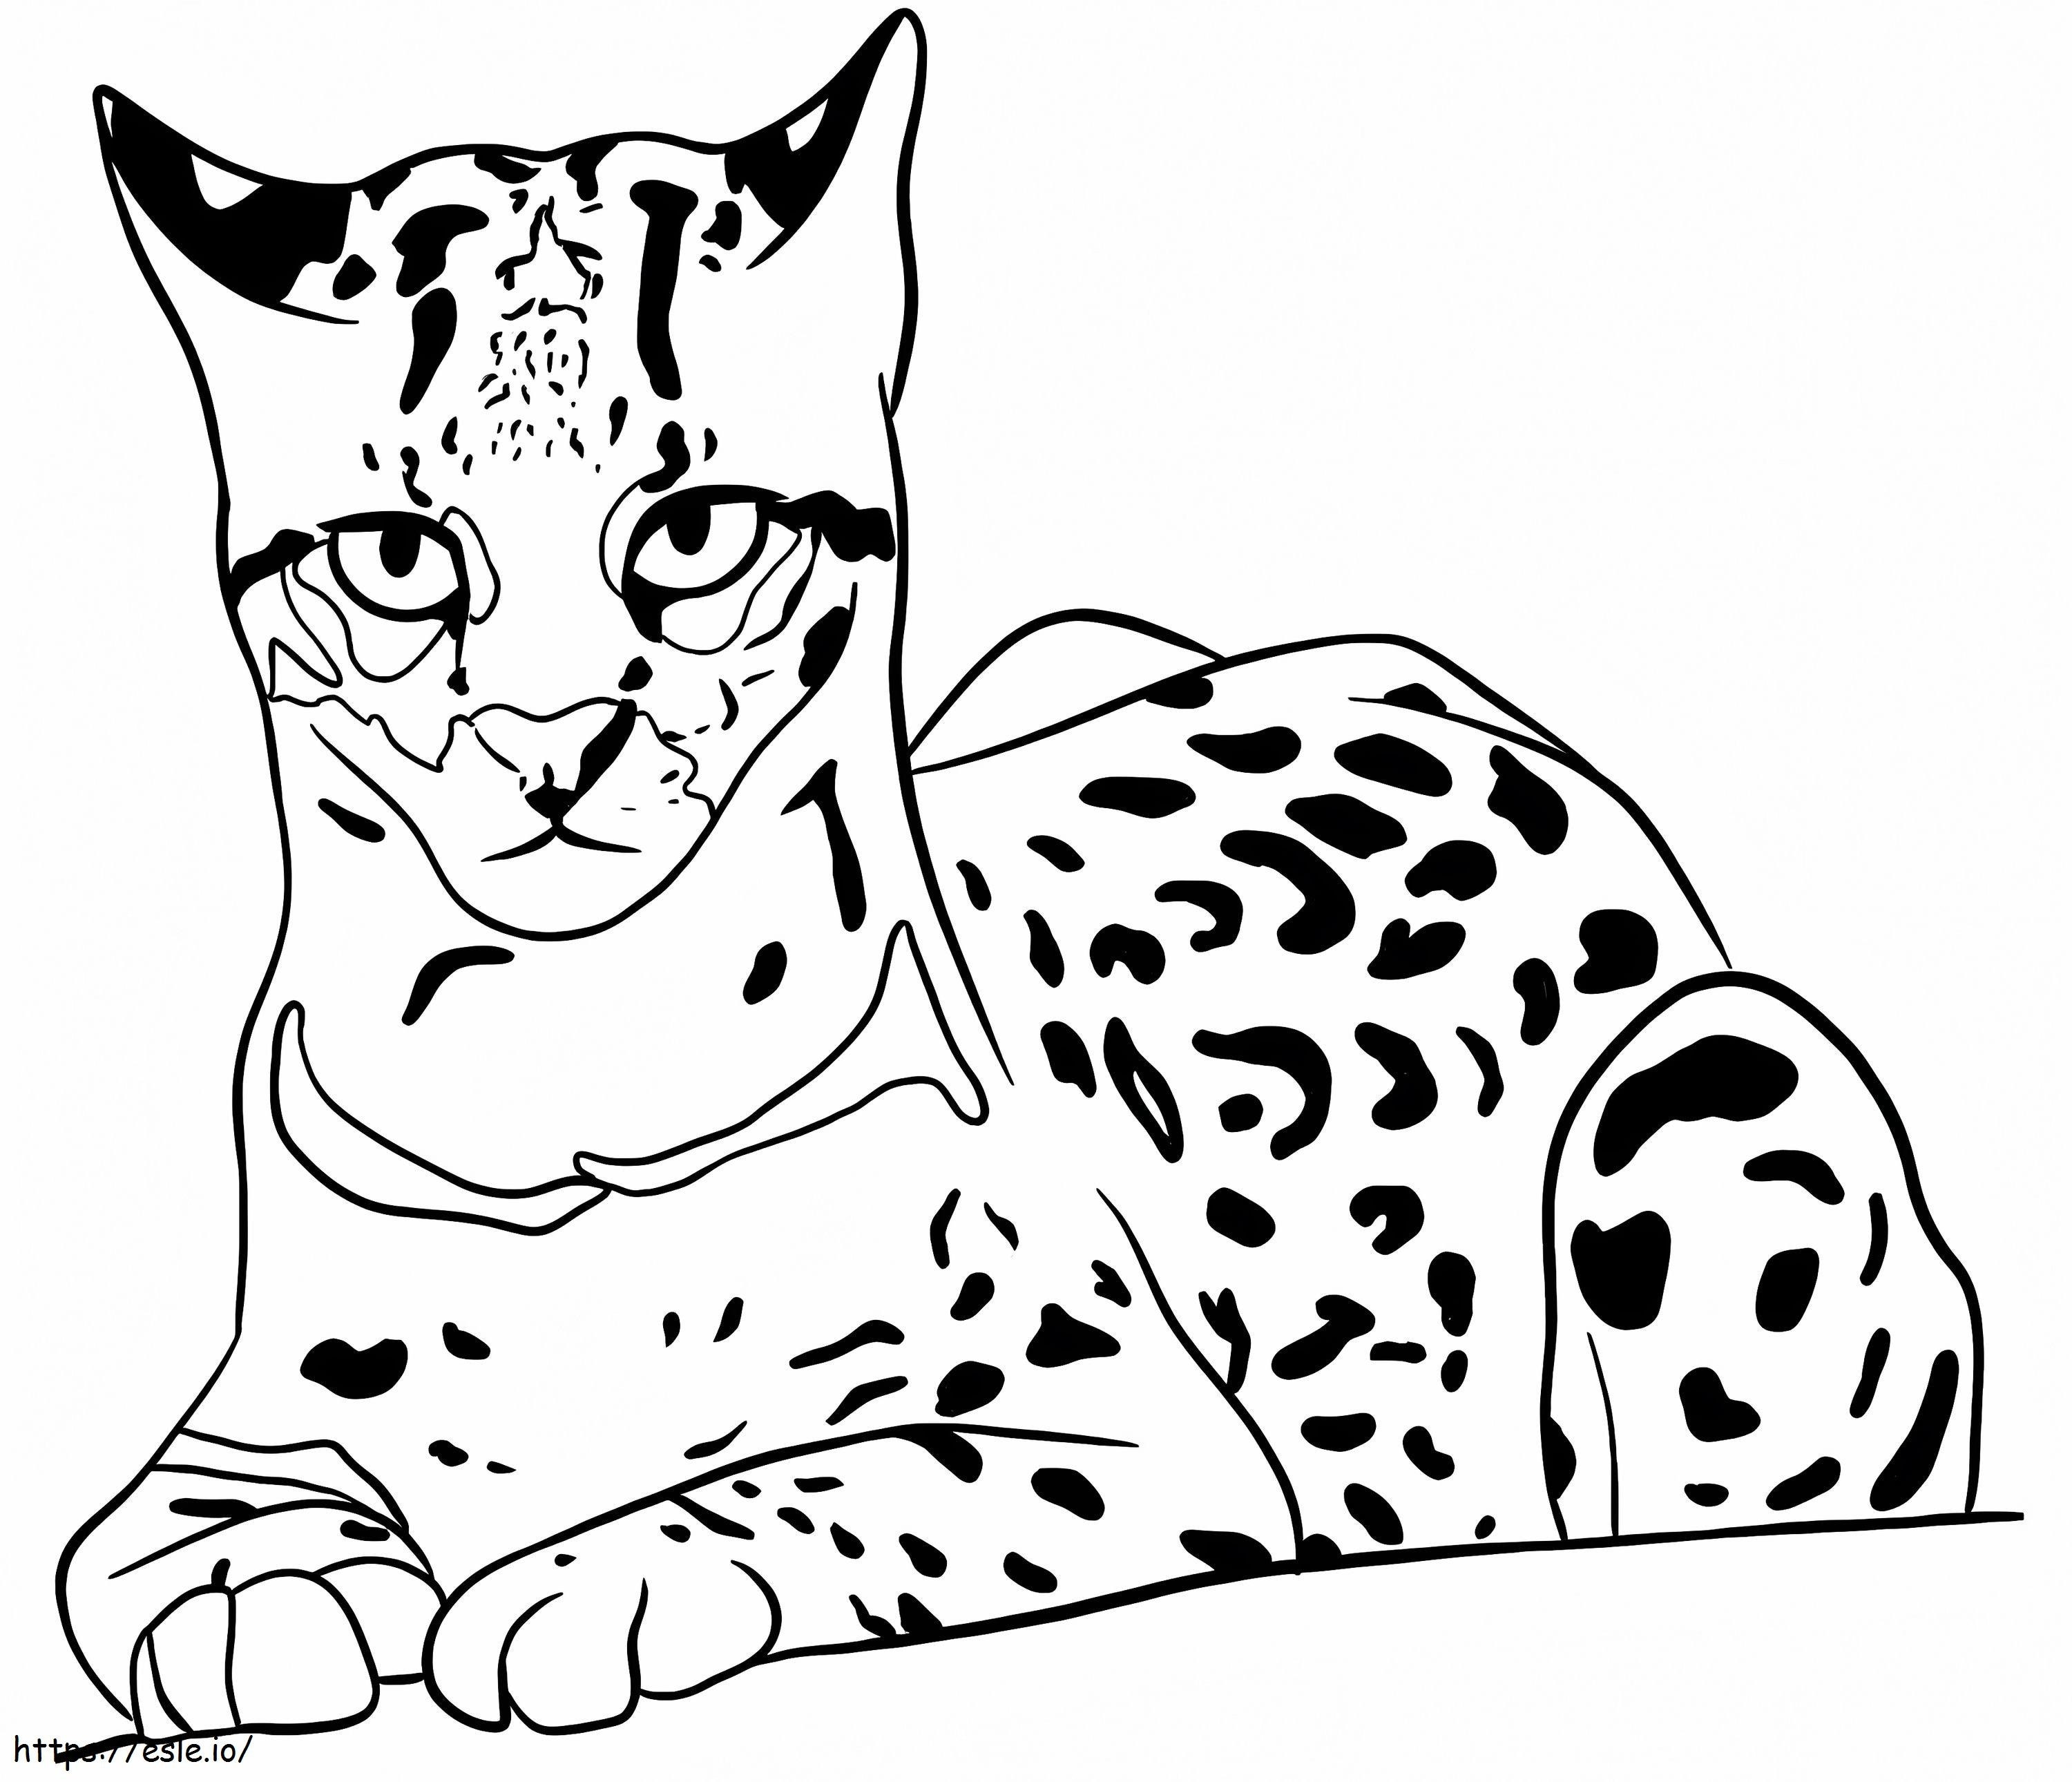 Normal Ocelot coloring page